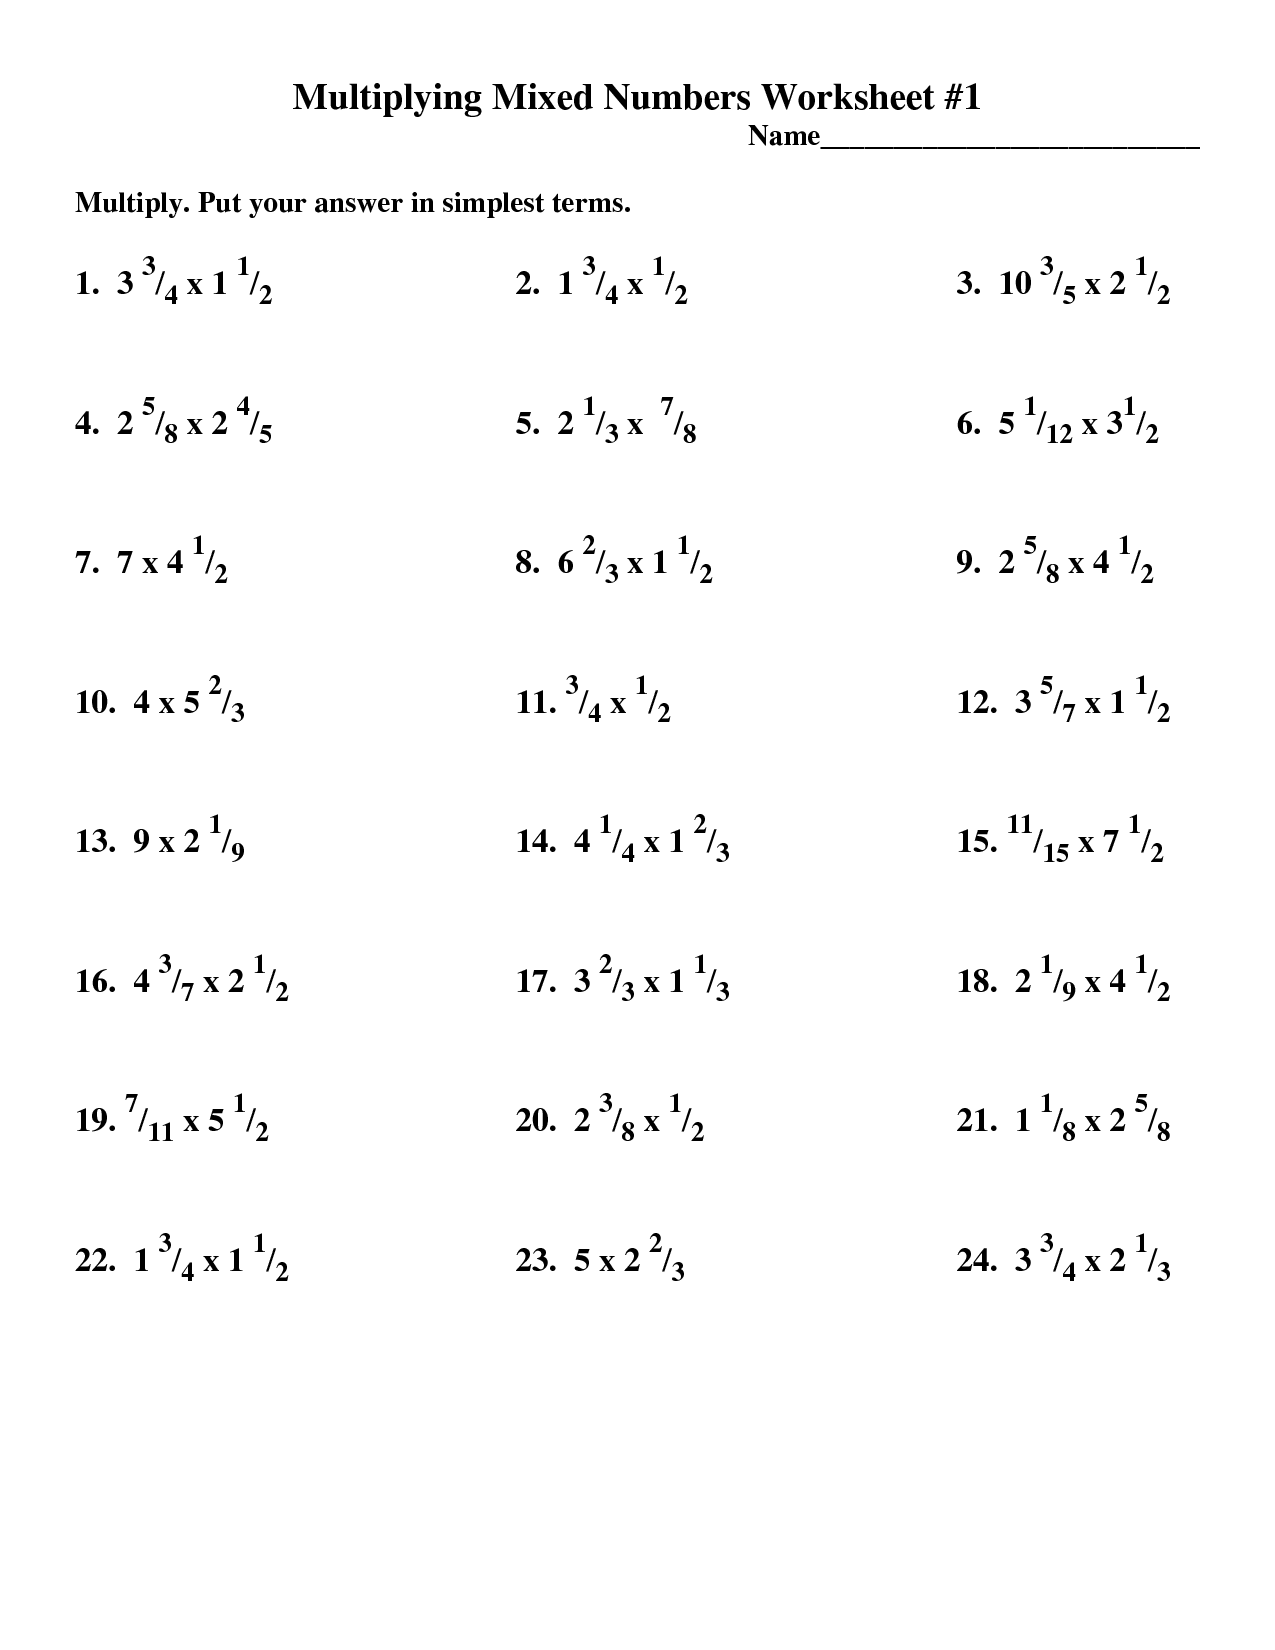 Multiplying Mixed Numbers Worksheets Image